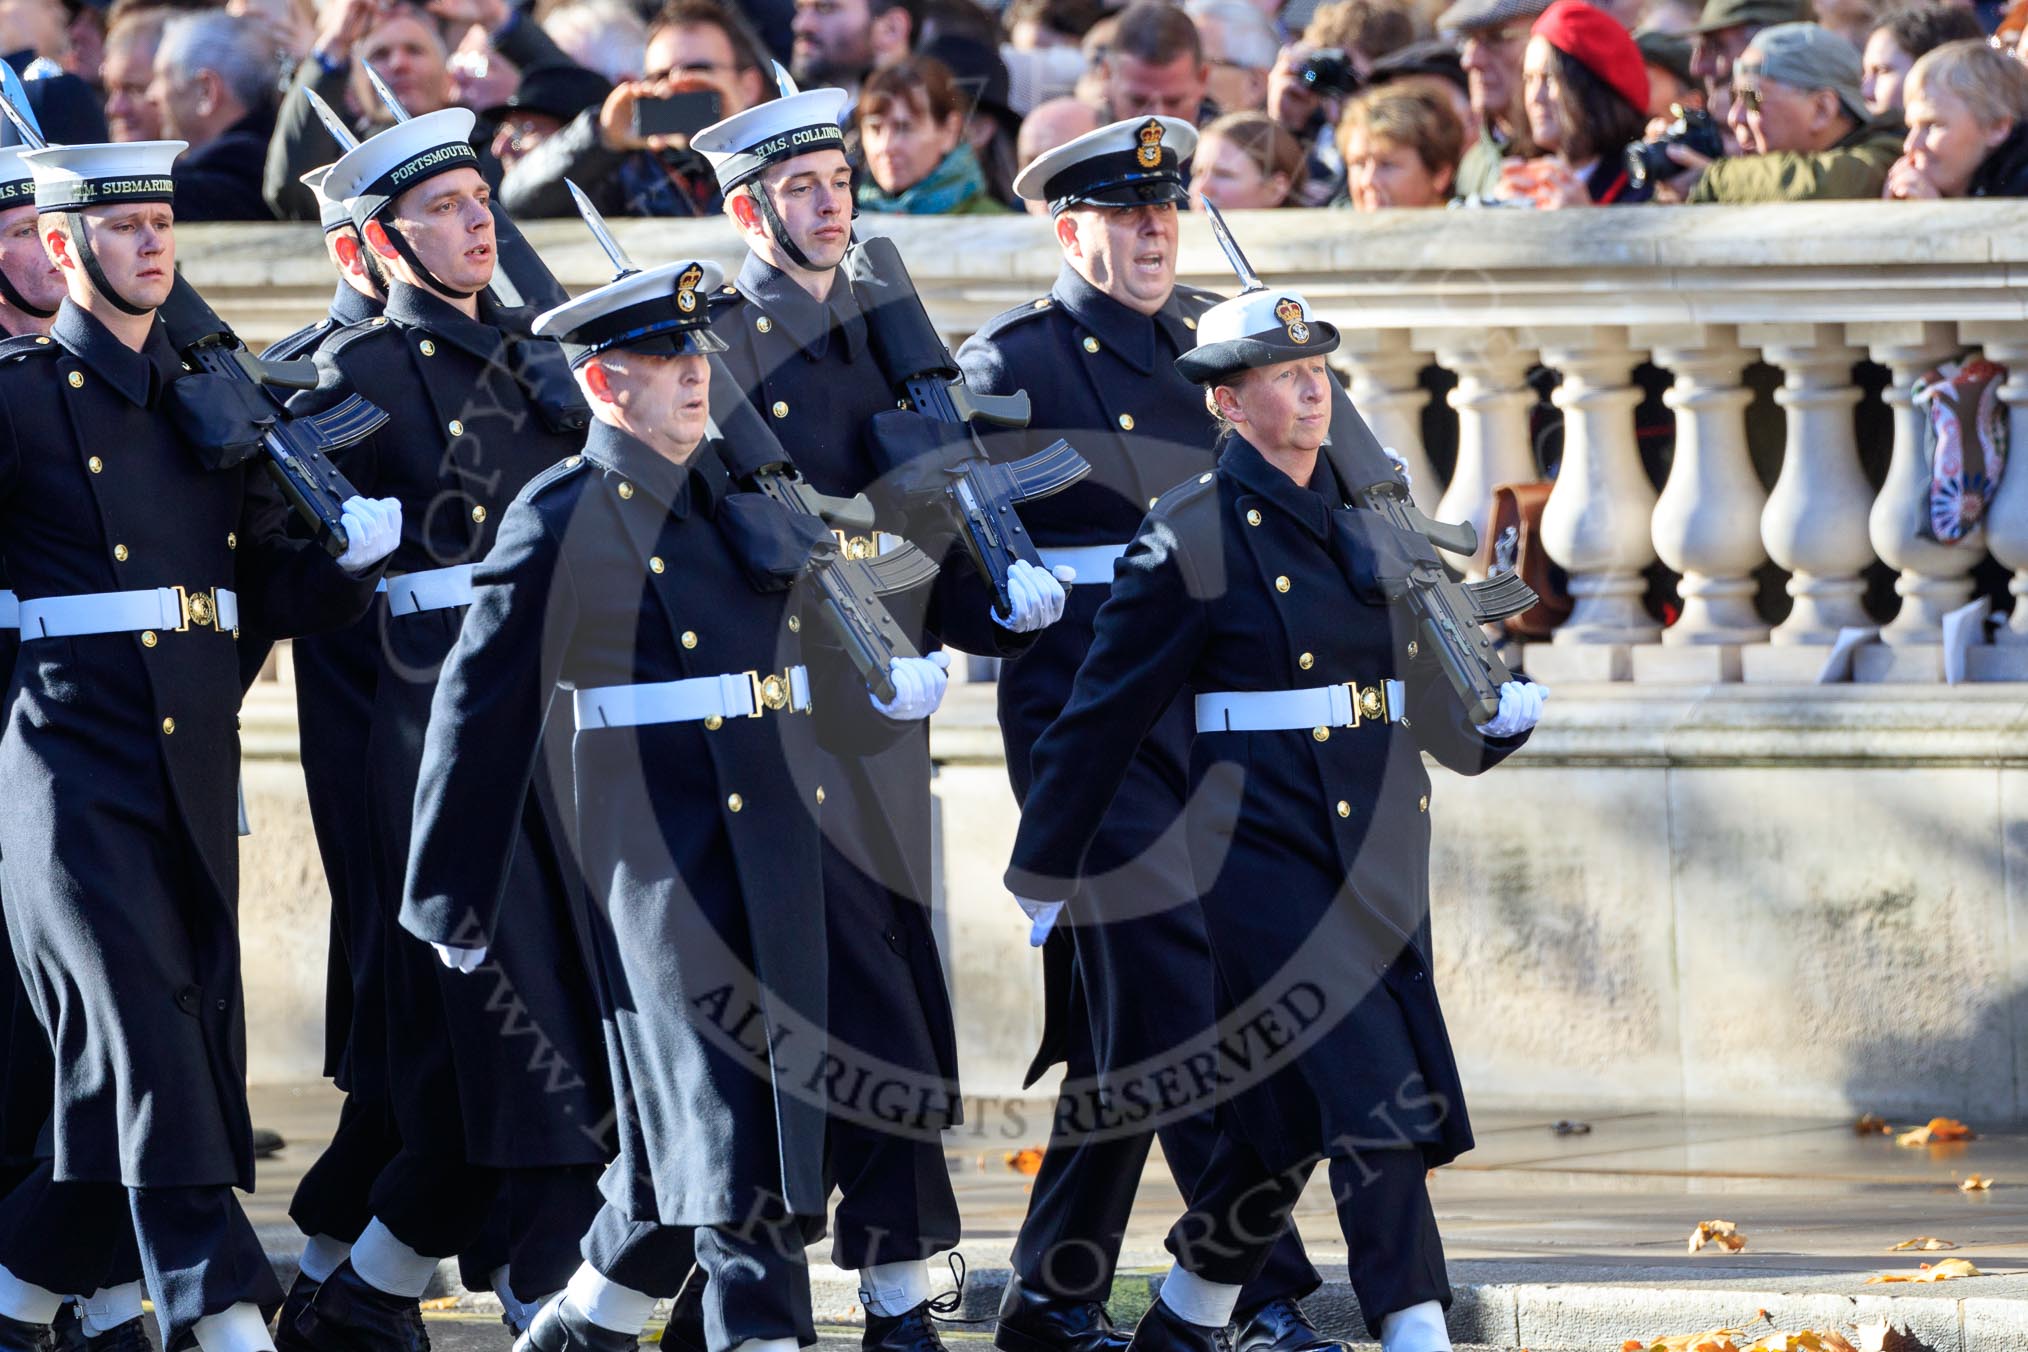 The Service detachment from the Royal Navy arrives on Whitehall before the Remembrance Sunday Cenotaph Ceremony 2018 at Horse Guards Parade, Westminster, London, 11 November 2018, 10:18.